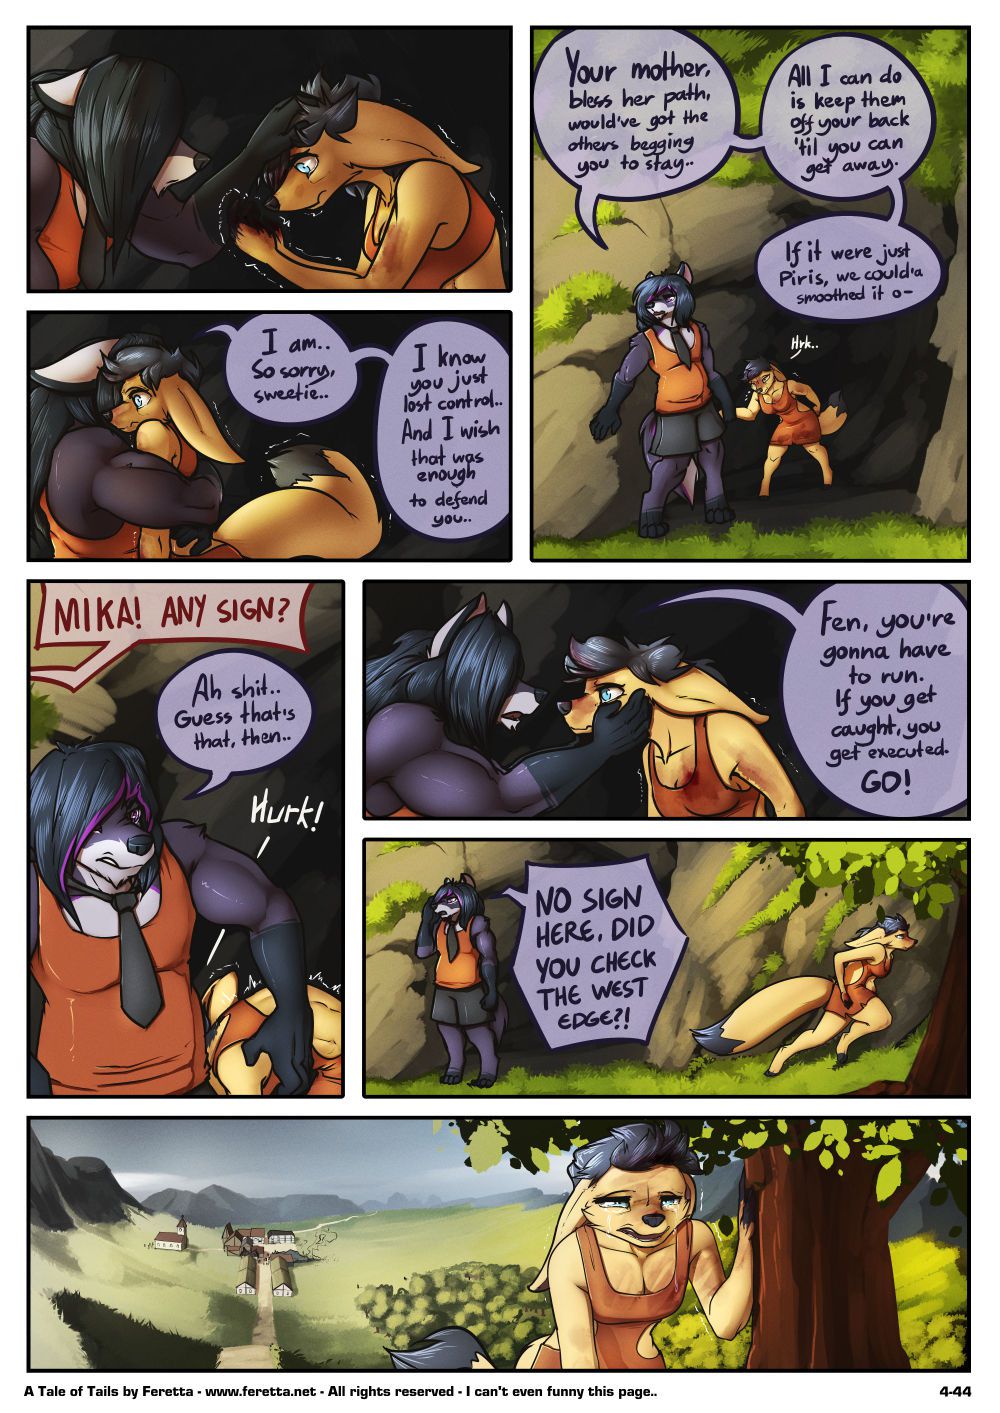 [Feretta] Farellian Legends: A Tale of Tails (w/Extras) [Ongoing] 194